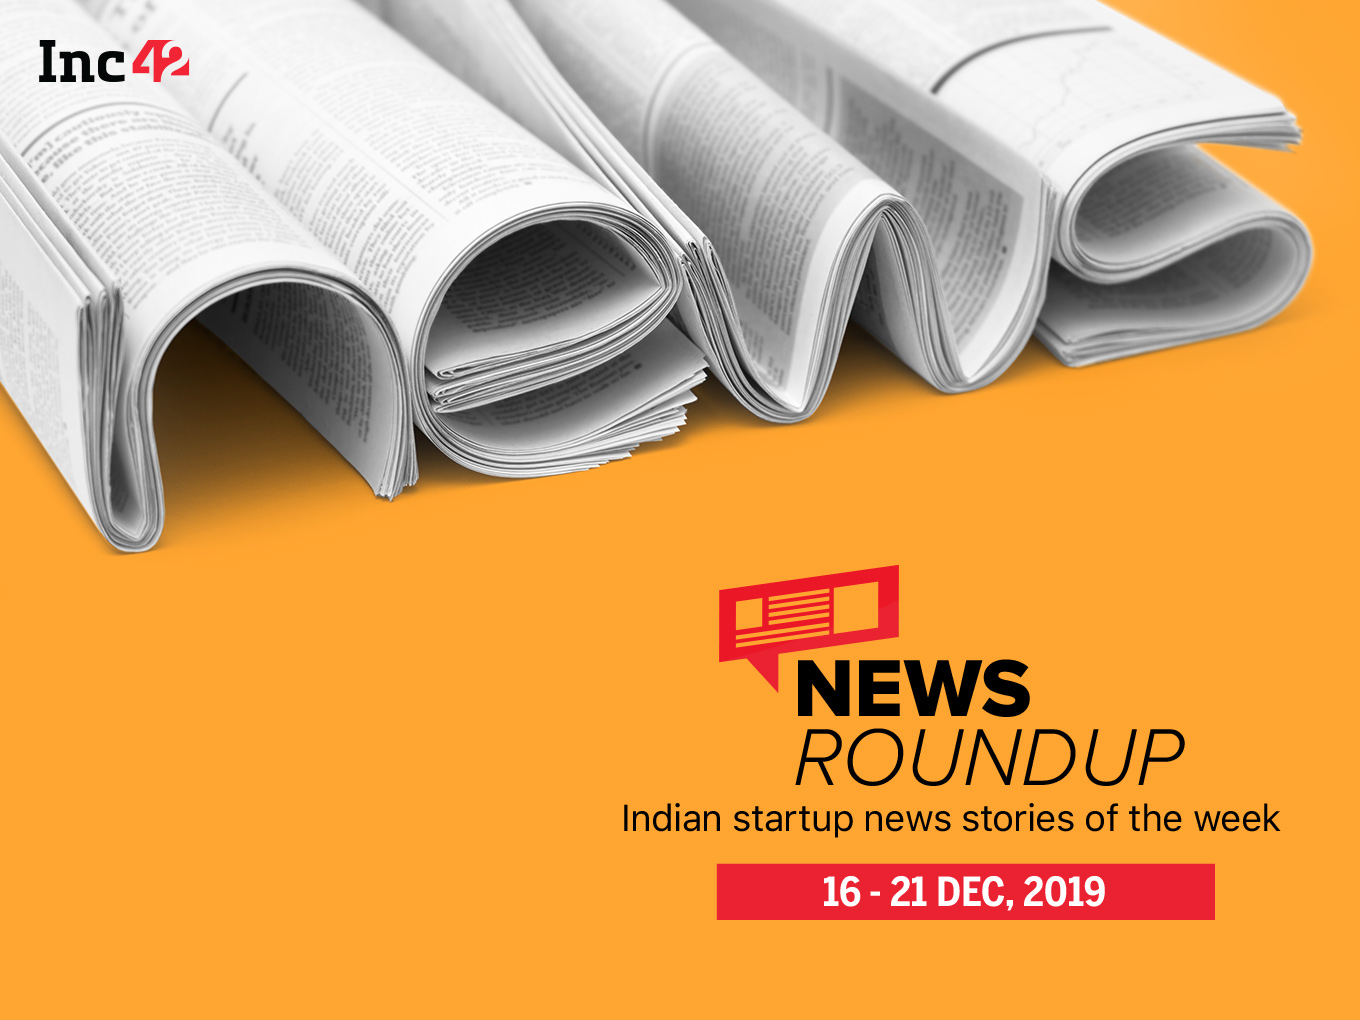 News Roundup: 11 Indian Startup News Stories You Don’t Want To Miss This Week [Dec 16 - 21]